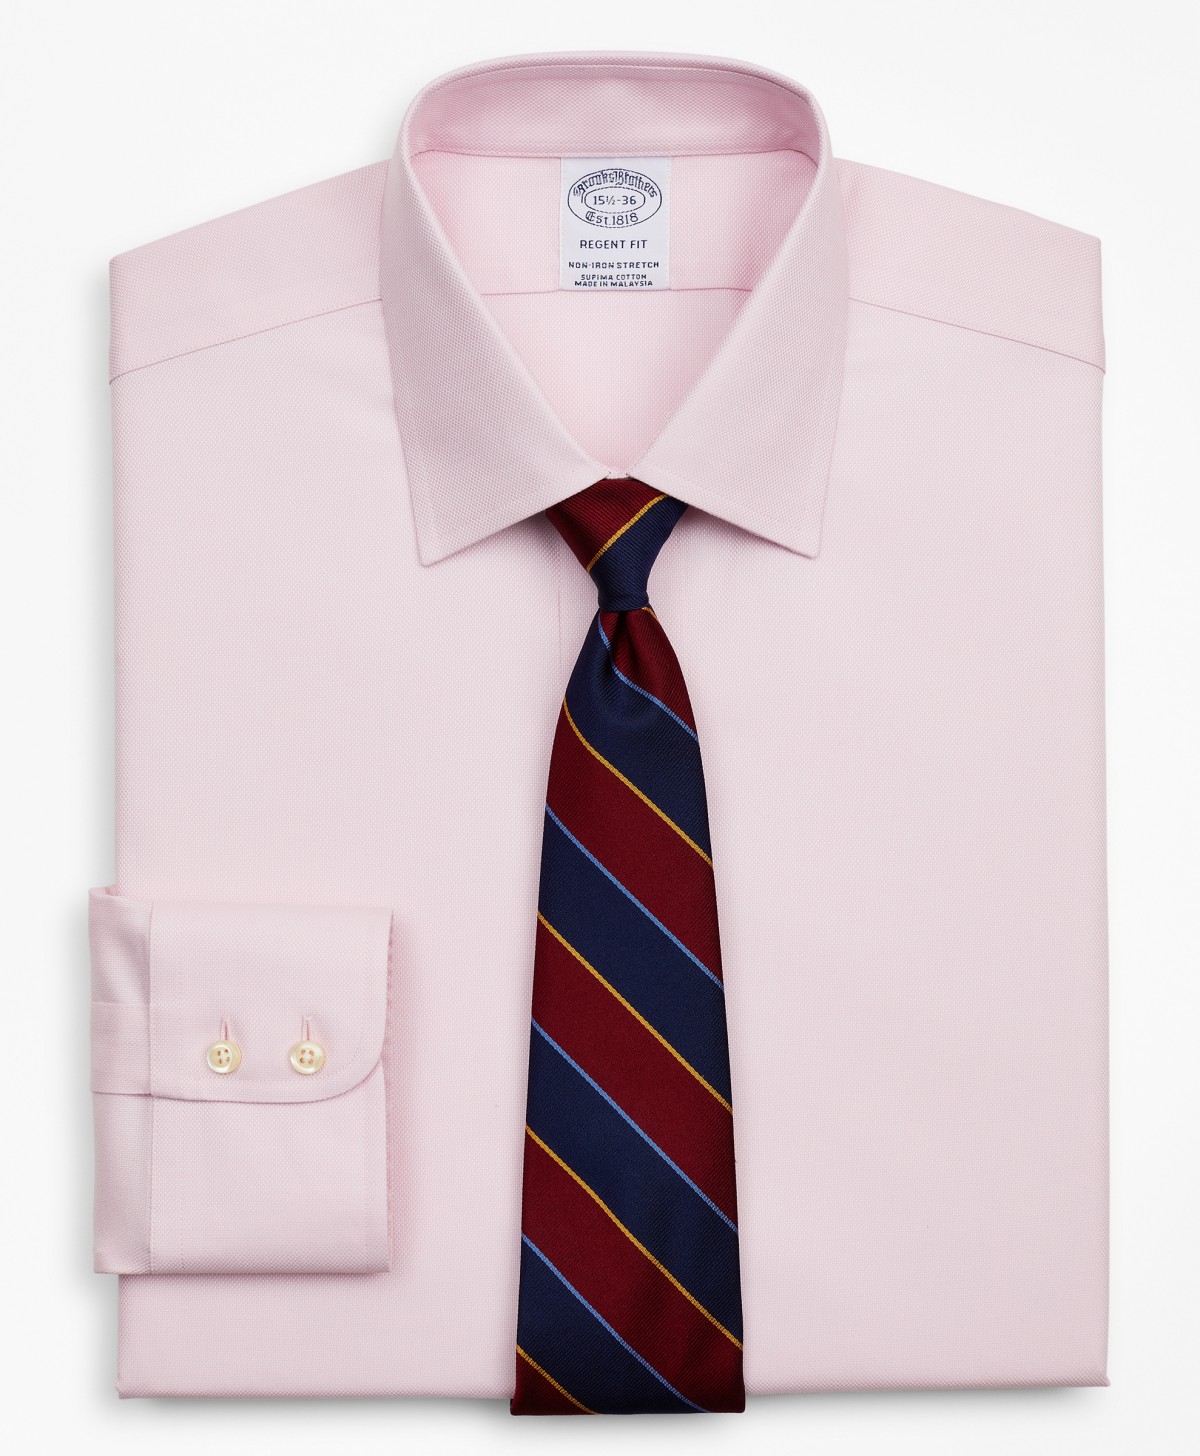 Stretch Regent Fitted Dress Shirt, Non-Iron Royal Oxford Ainsley Collar